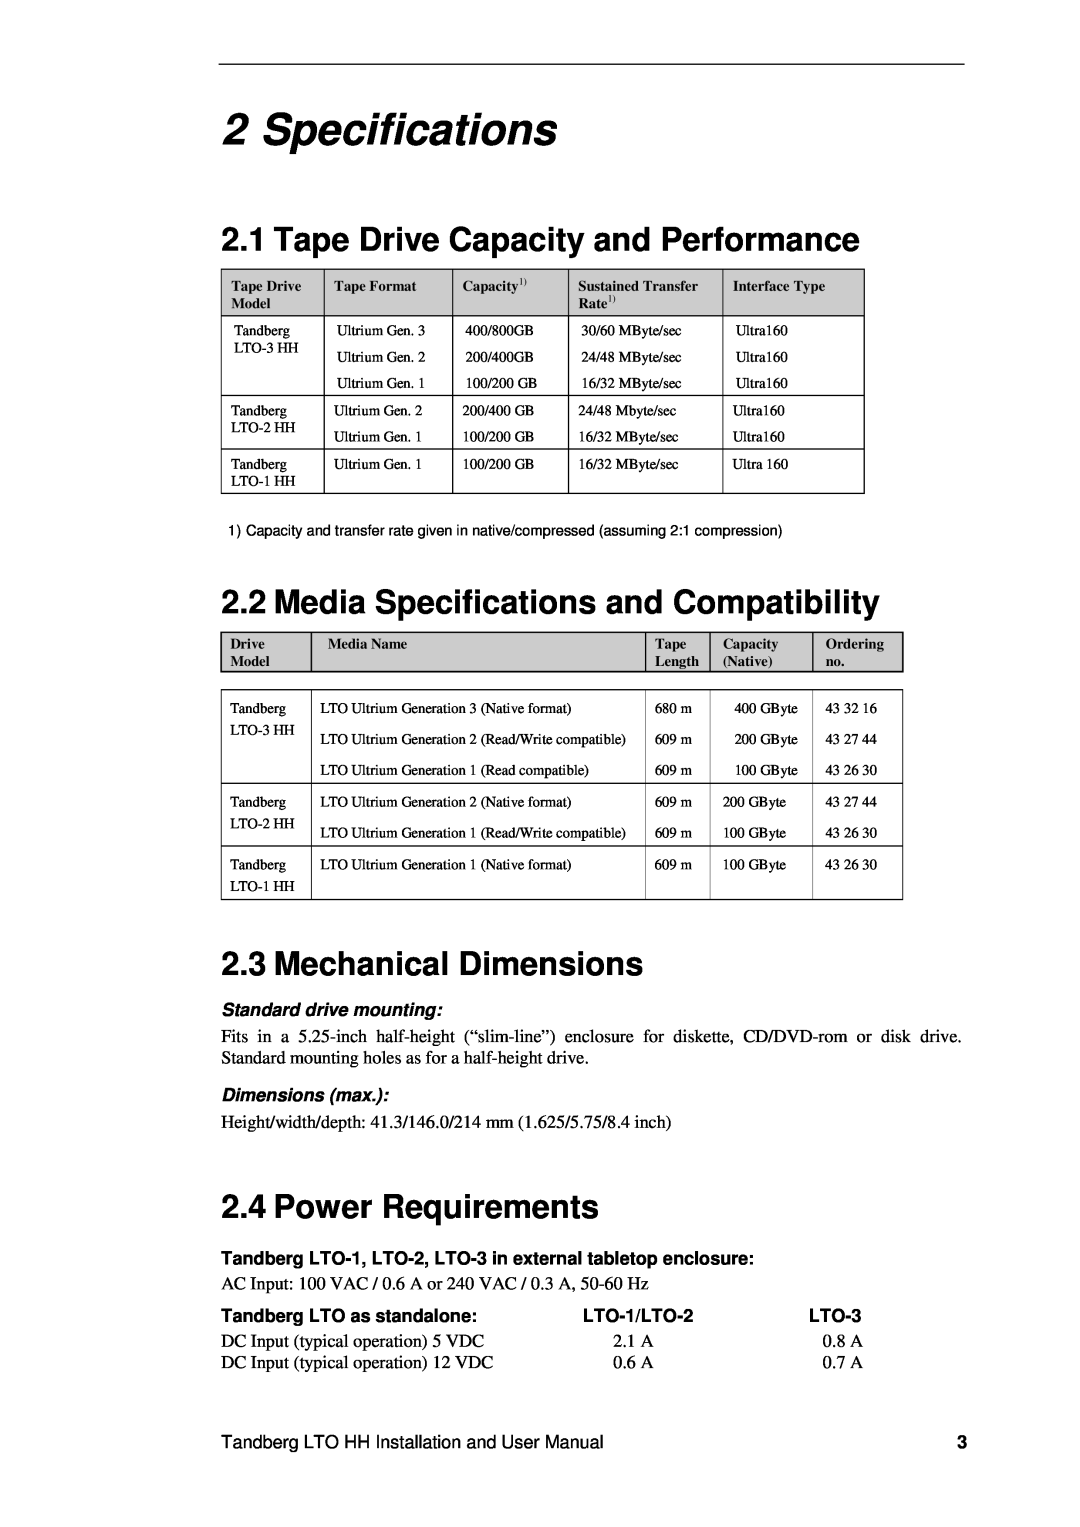 Tandberg Data LTO-2 HH Tape Drive Capacity and Performance, Media Specifications and Compatibility, Power Requirements 